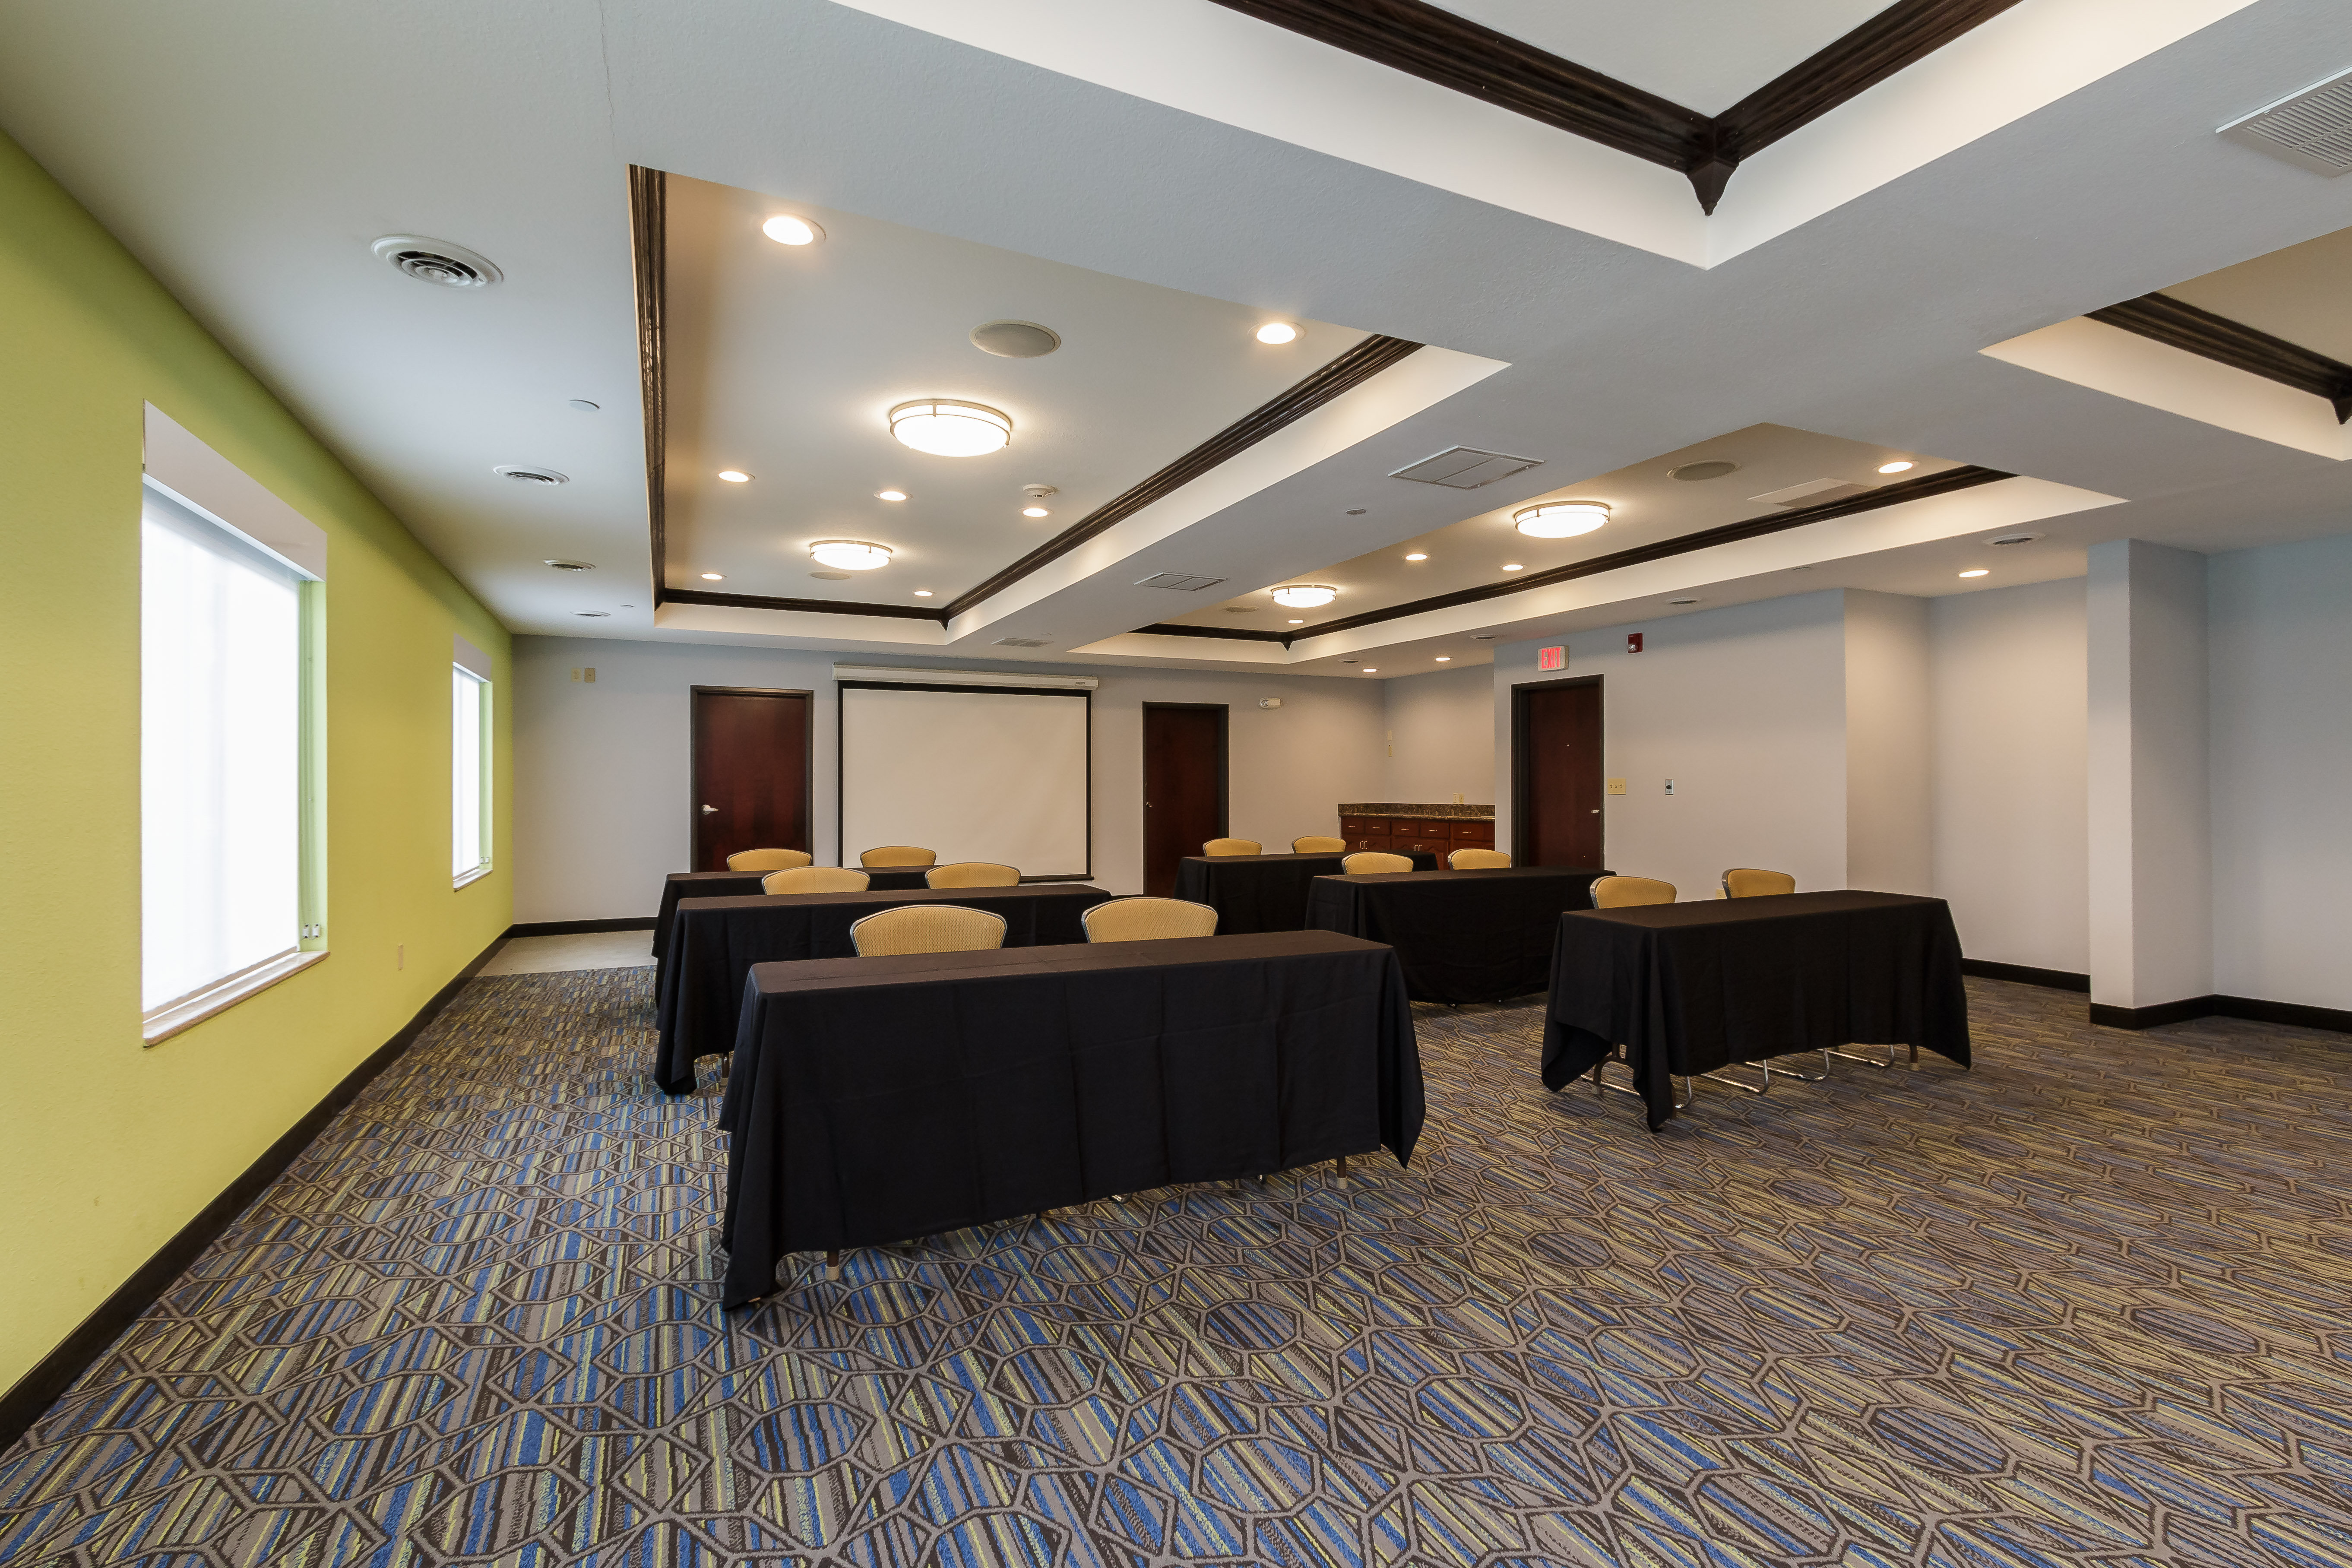 Our free WiFi will make your next meeting a success!